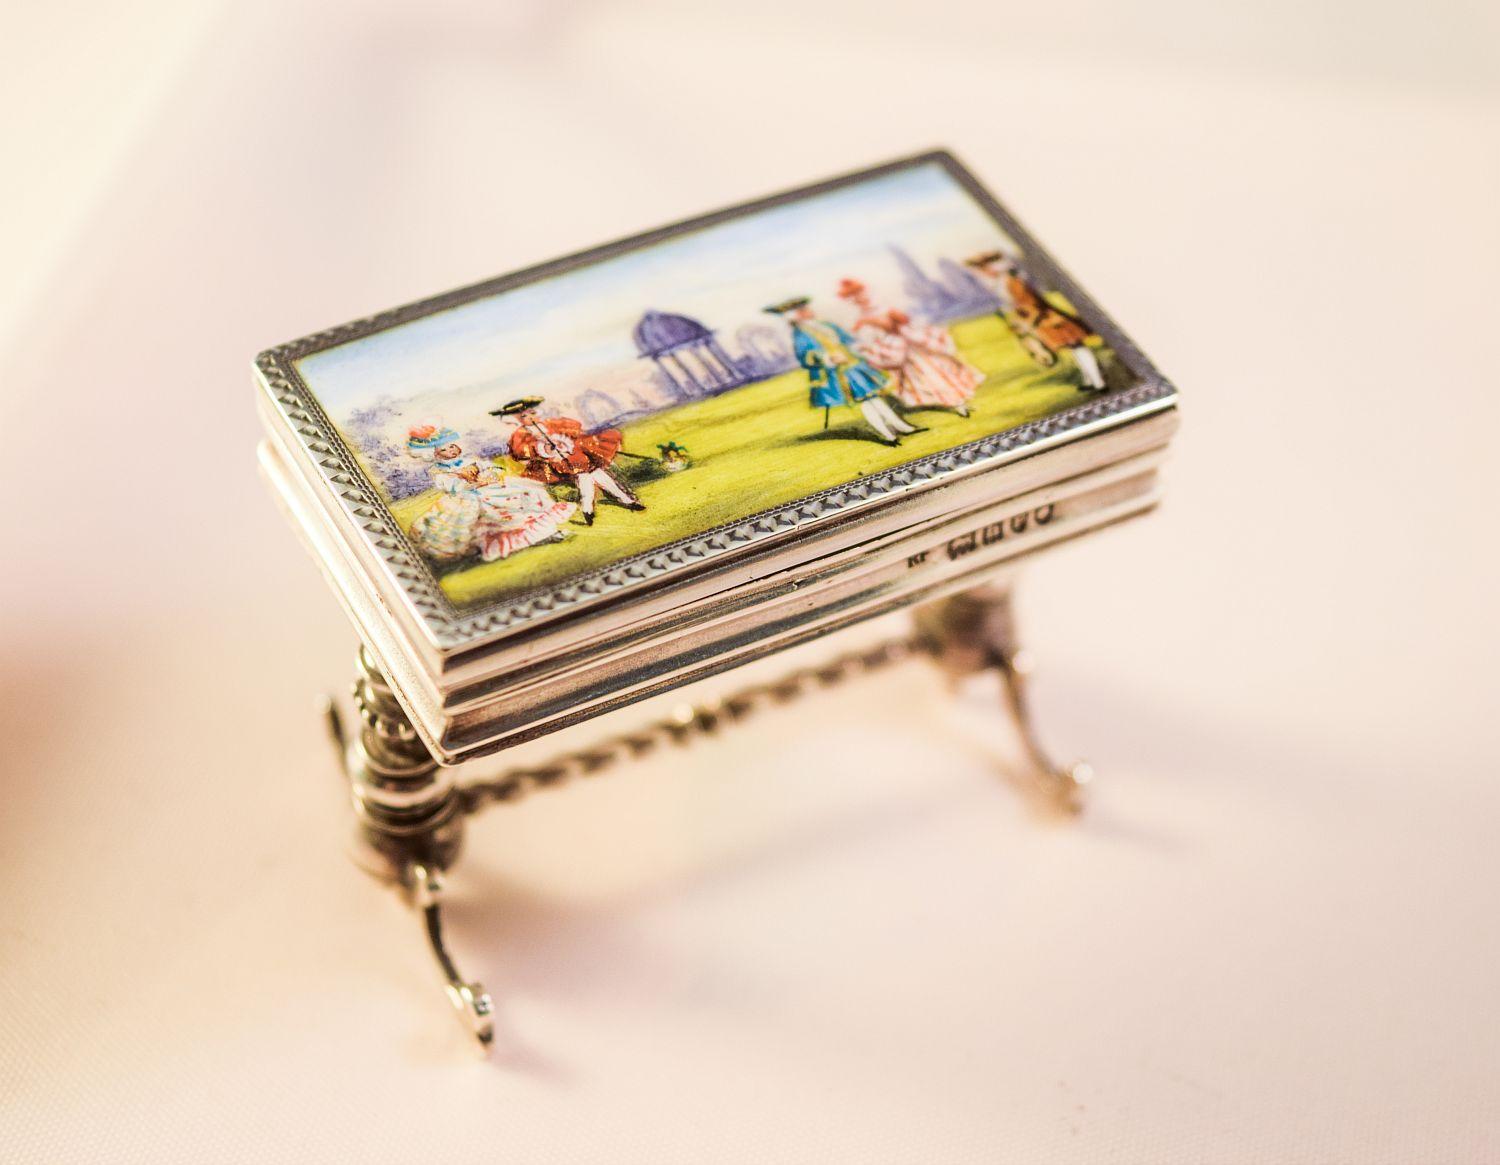 ENAMEL MINIATURE SILVER TABLE £425      £1200

Edwardian miniature silver and enamel table box. 
Modelled as an occasional
table on turned supports joined bay a stretcher.
The enamel top with 18th century figures in a landscape.
London import marks